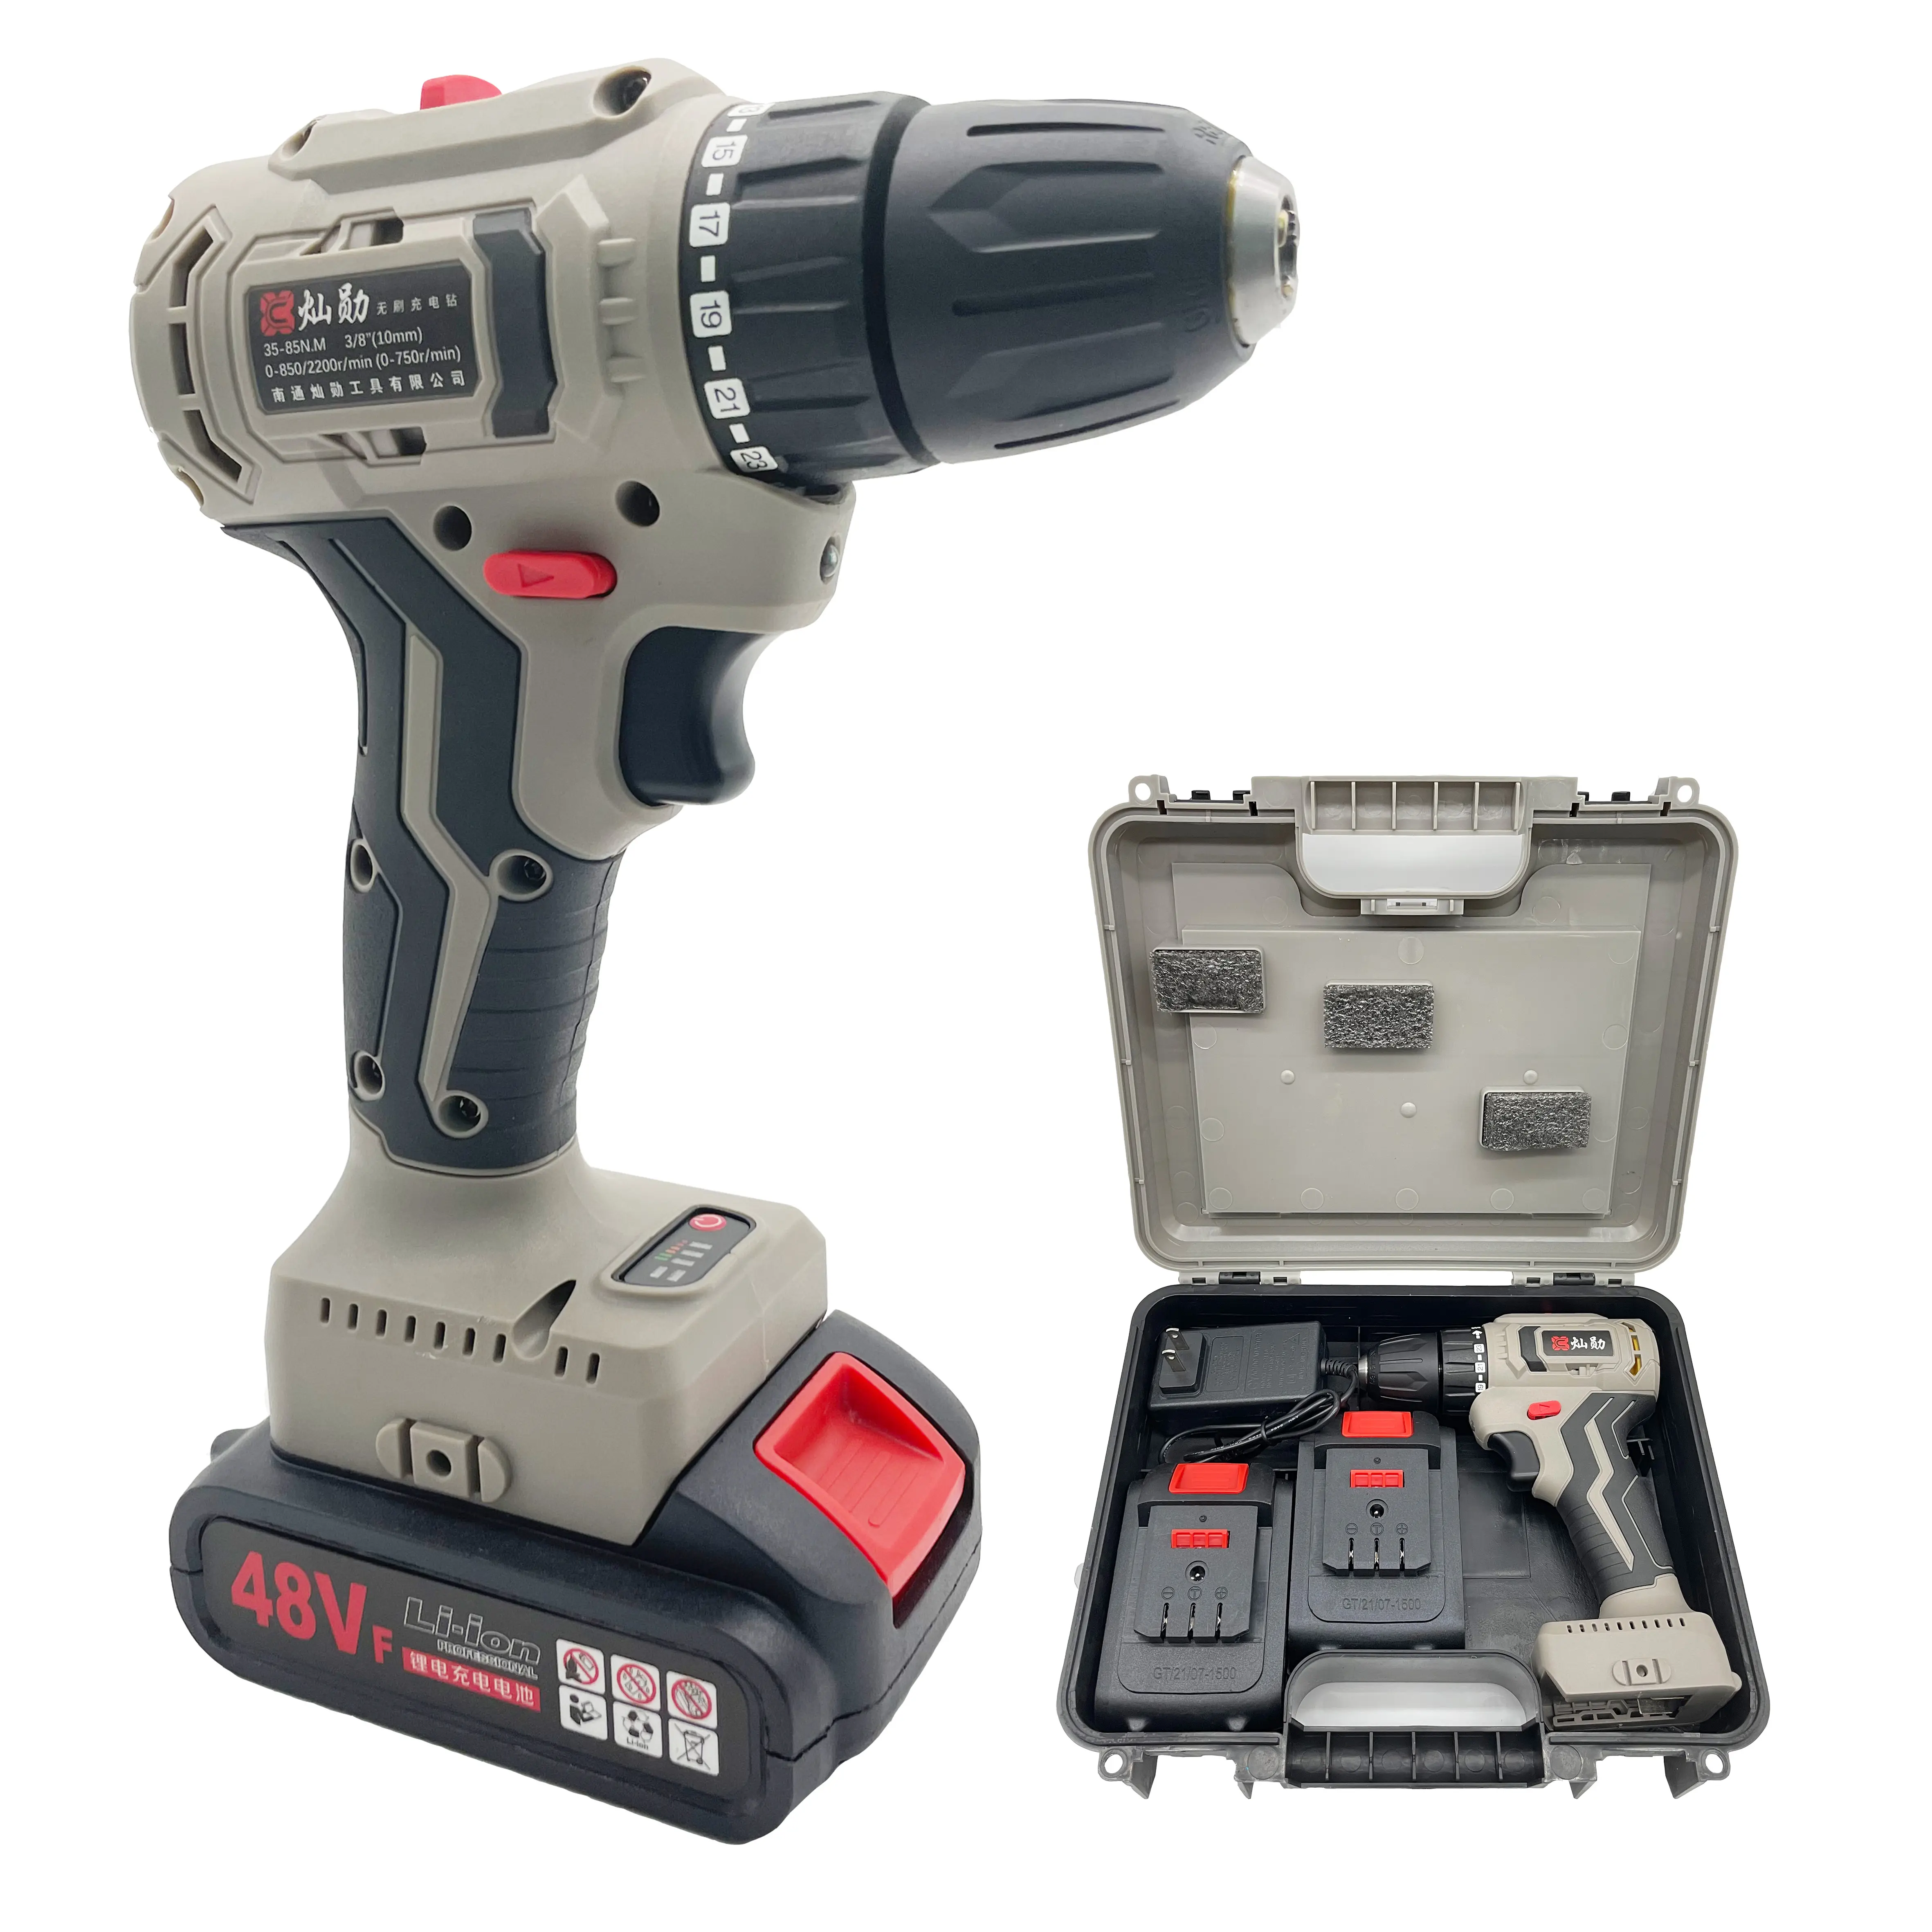 Professional 48V Cordless Brushless Motor Driver Electric Screwdriver Drill With High Power